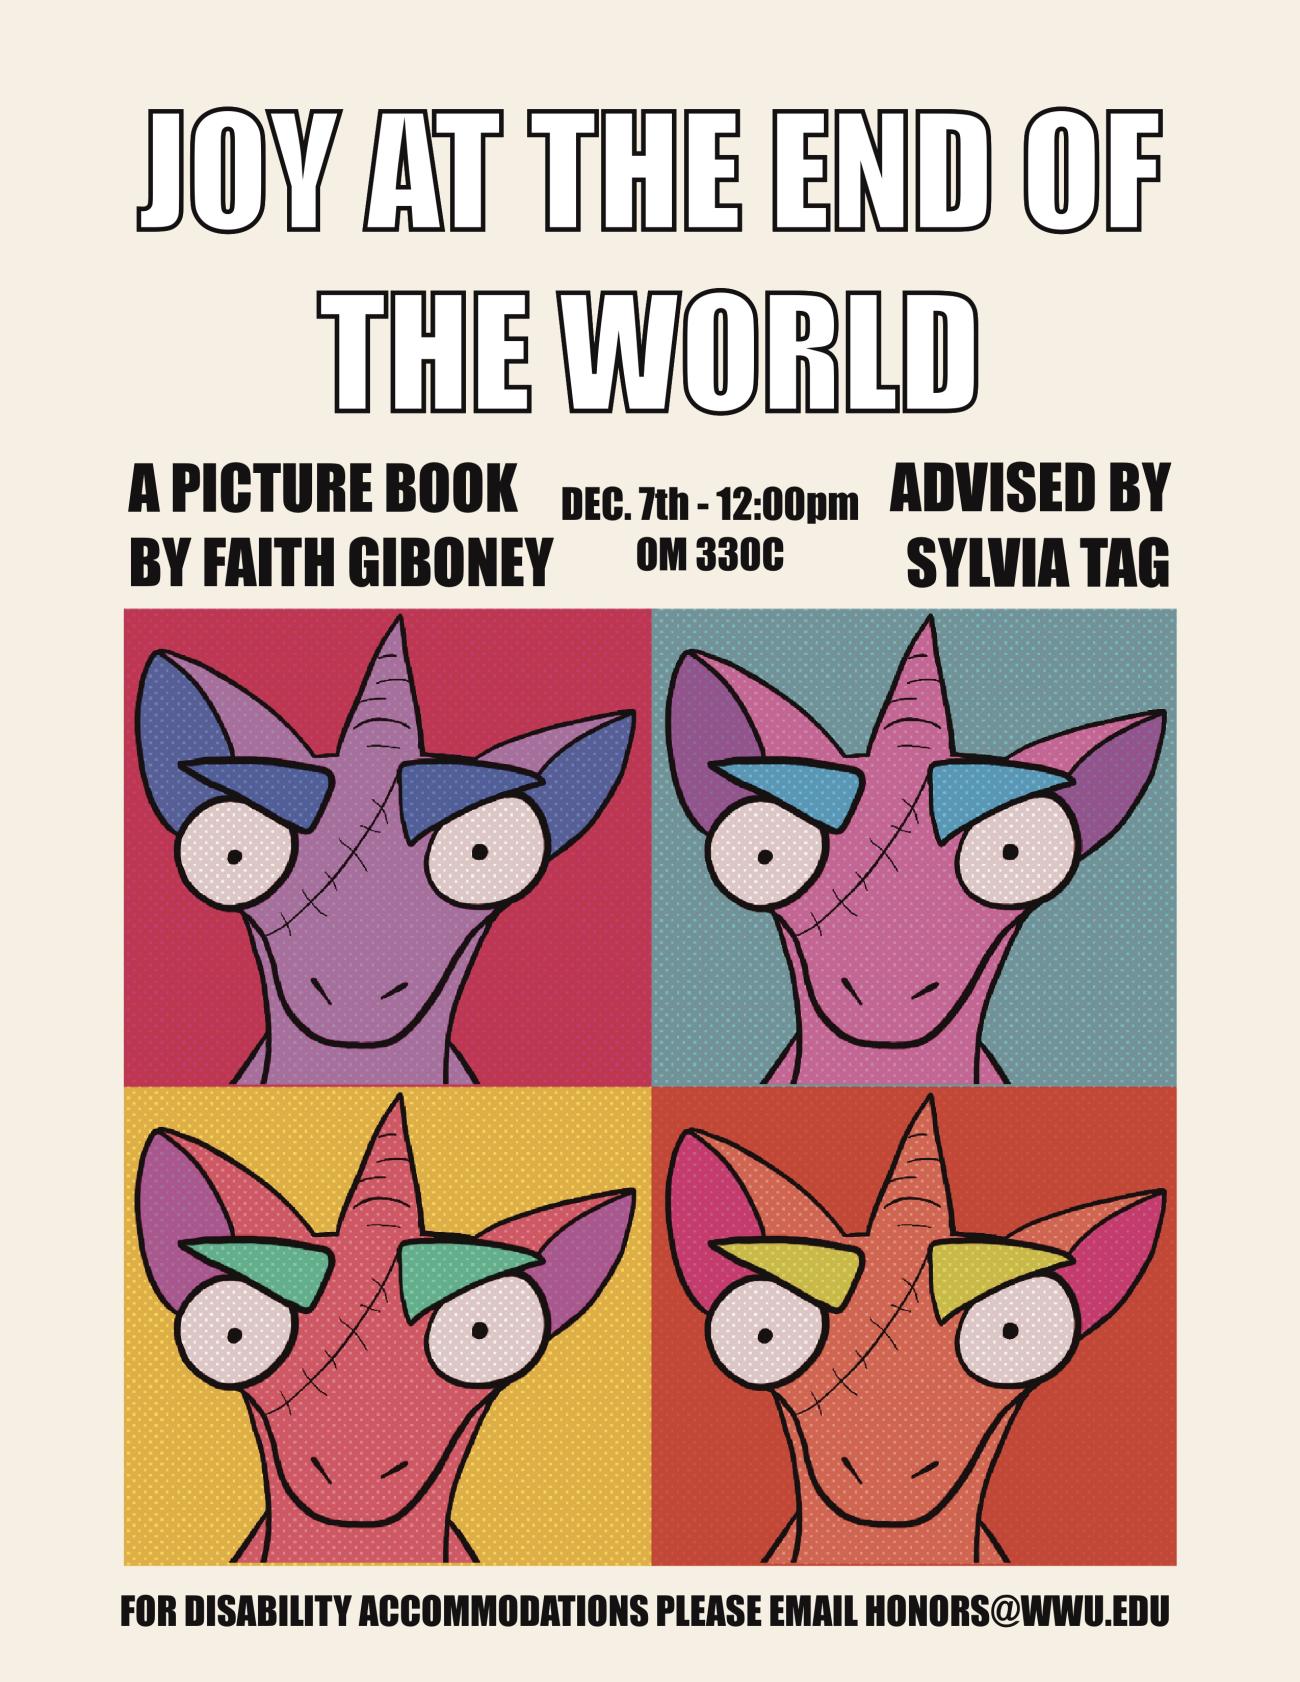 Text reads “Joy at the End of the World, a picture book by Faith Giboney, December 7th 12:00 pm Old Main 330C, advised by Sylvia Tag, for disability accommodations please email honors@wwu.edu”. In the center of the poster are four identical, glaring unicorns in the pop art style. Clockwise from the upper left hand corner: a purple unicorn against a pink background, a pink unicorn against a blue background, an orange unicorn against a red background, and a red unicorn against a yellow background.